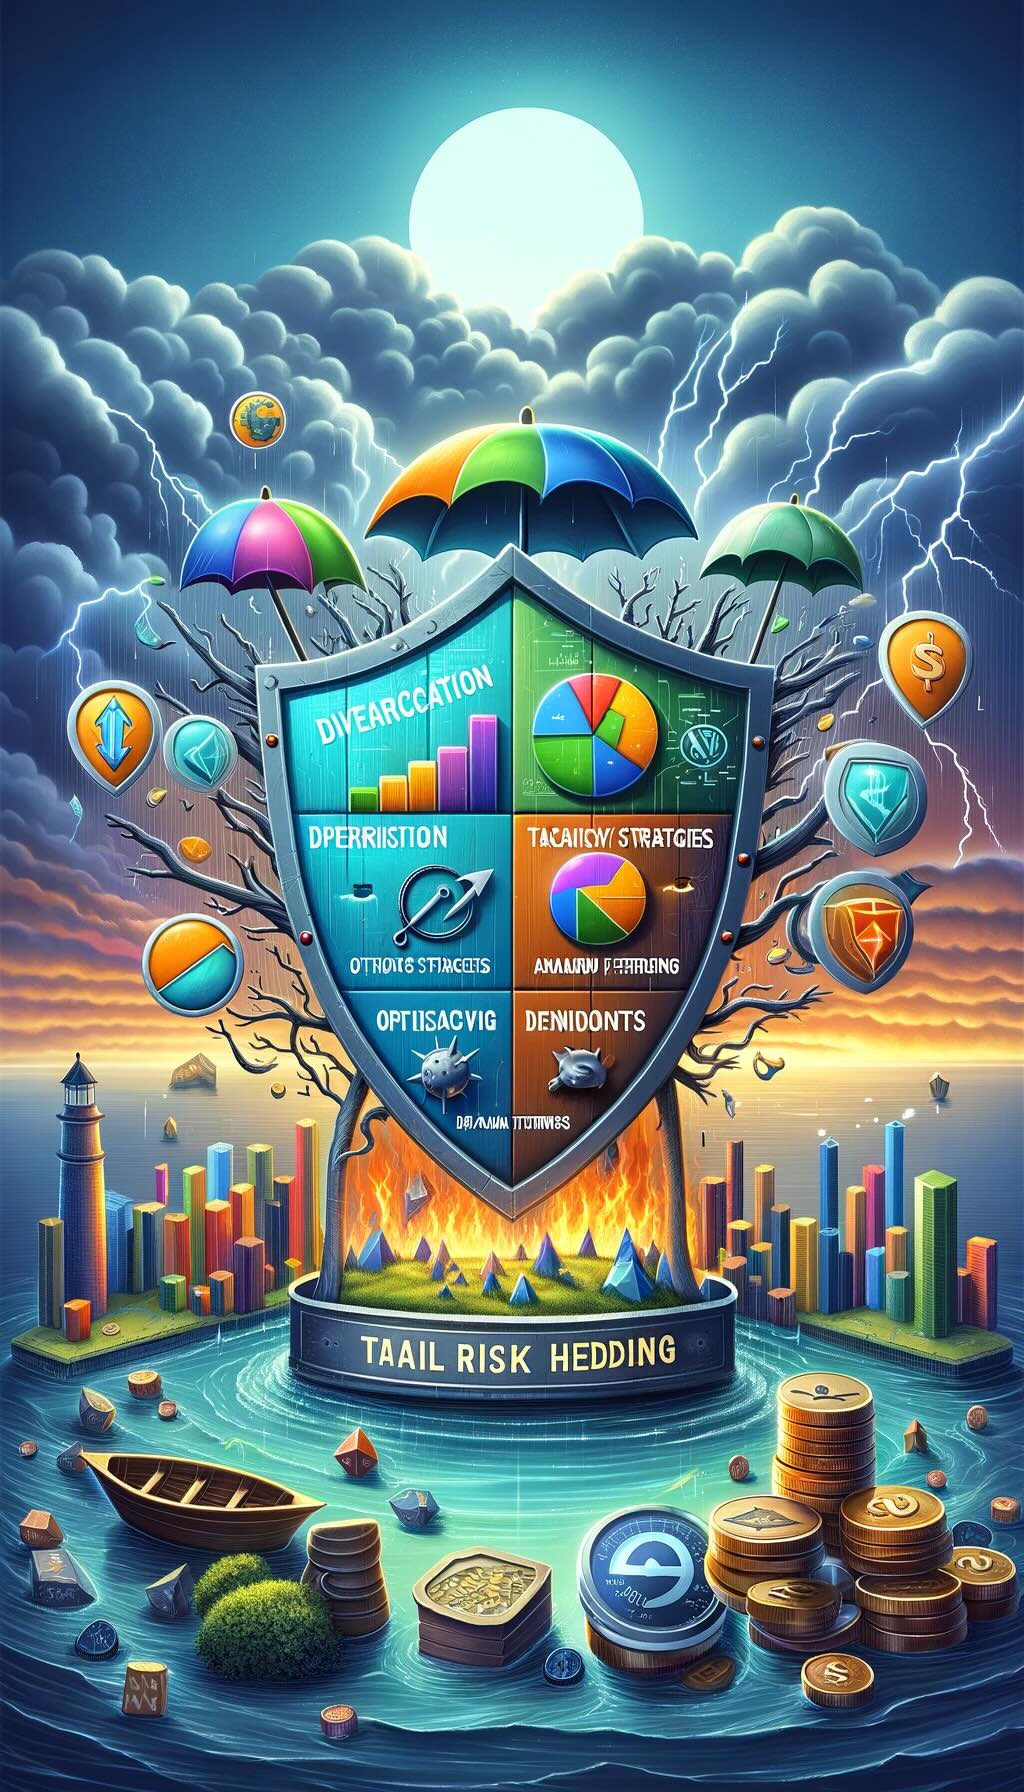 Managing investment risk through various tail risk hedging strategies. It features a safeguarding shield that encompasses symbols for each strategy: a colorful pie chart representing diversification, a protective umbrella for options-based strategies, a navigating compass for tactical asset allocation and dynamic hedging, and a treasure chest symbolizing alternative investments like managed futures and commodities. Against a backdrop of a stormy financial landscape marked by lightning bolts, the shield stands firm, offering protection against market volatility. This visual narrative, rich in symbolic imagery and vibrant colors, underscores the strategic importance of tail risk hedging in safeguarding investment portfolios from severe downturns, inviting viewers to explore the multifaceted approaches to risk management.